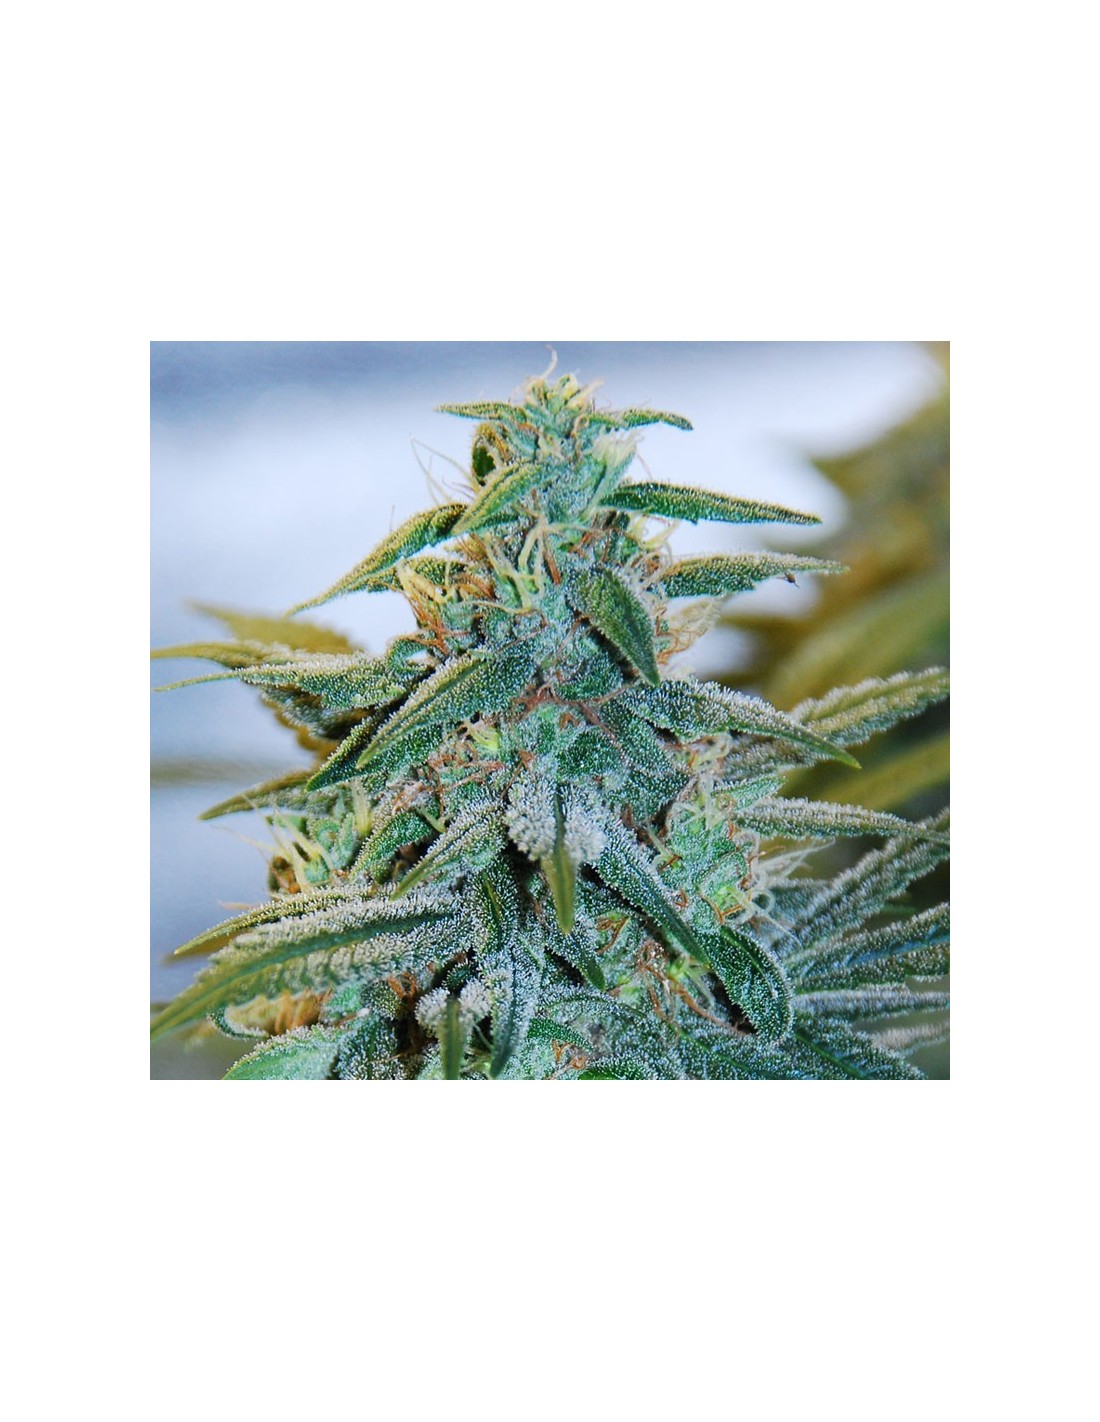 Buy Mazar Auto from Expert Seeds at Oaseeds